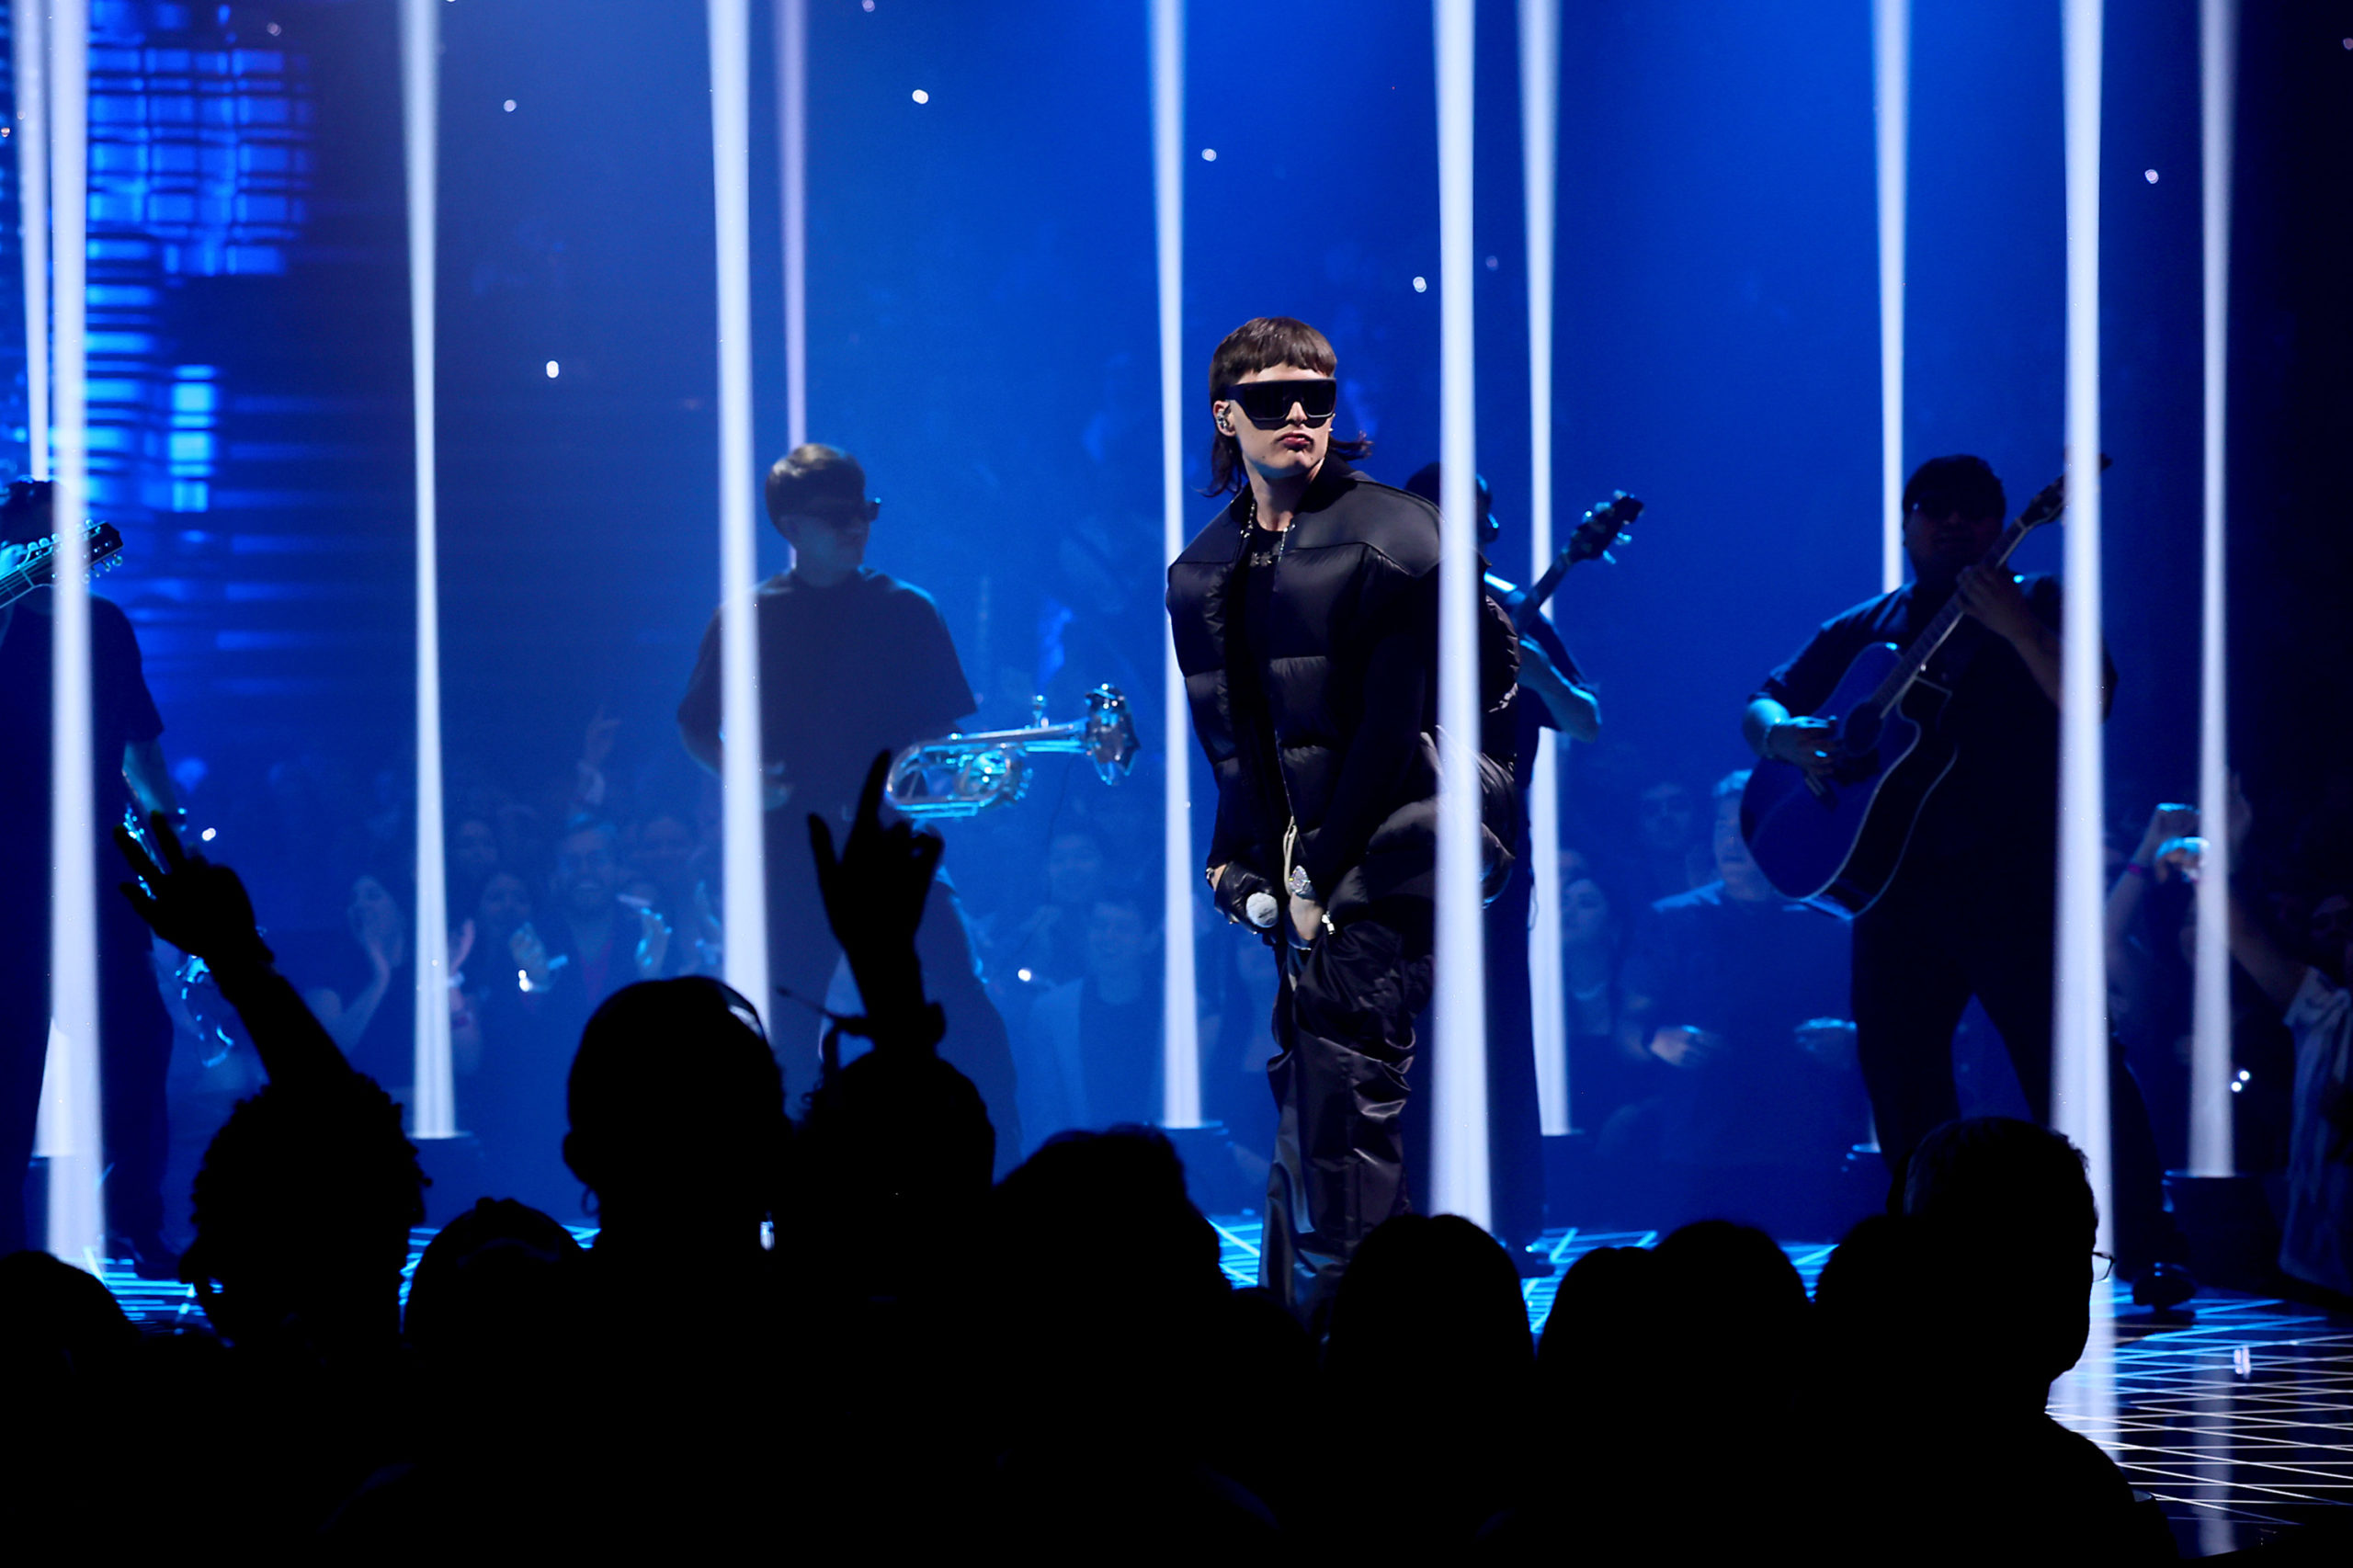 NEWARK, NEW JERSEY - SEPTEMBER 12: Peso Pluma performs onstage during the 2023 MTV Video Music Awards at Prudential Center on September 12, 2023 in Newark, New Jersey. (Photo by Theo Wargo/Getty Images for MTV)